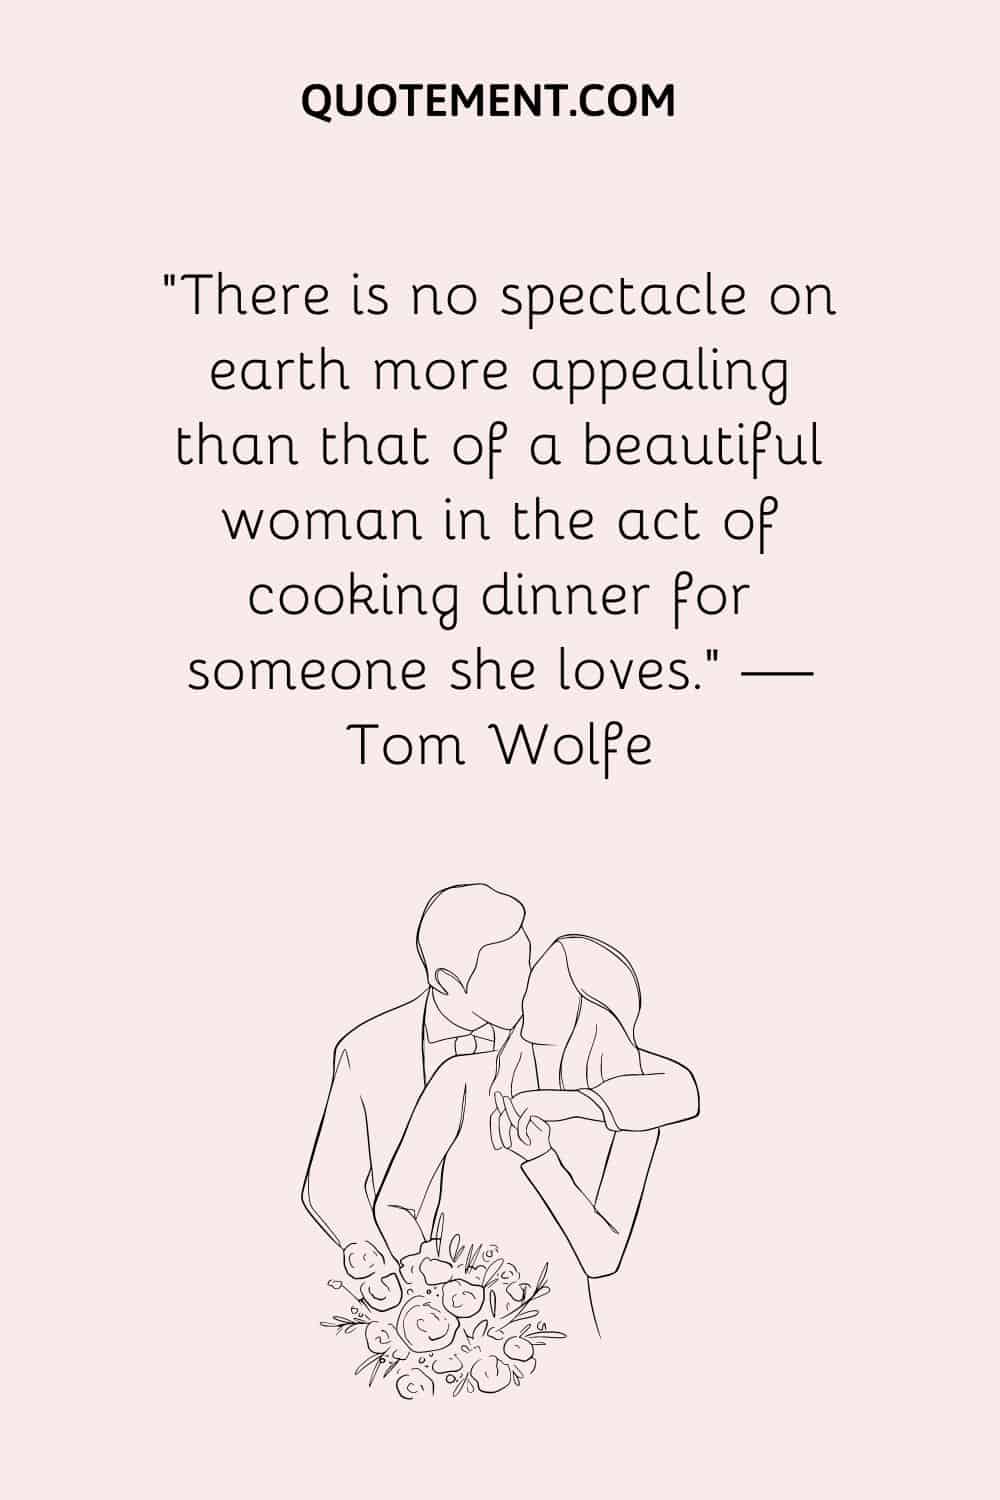 There is no spectacle on earth more appealing than that of a beautiful woman in the act of cooking dinner for someone she loves